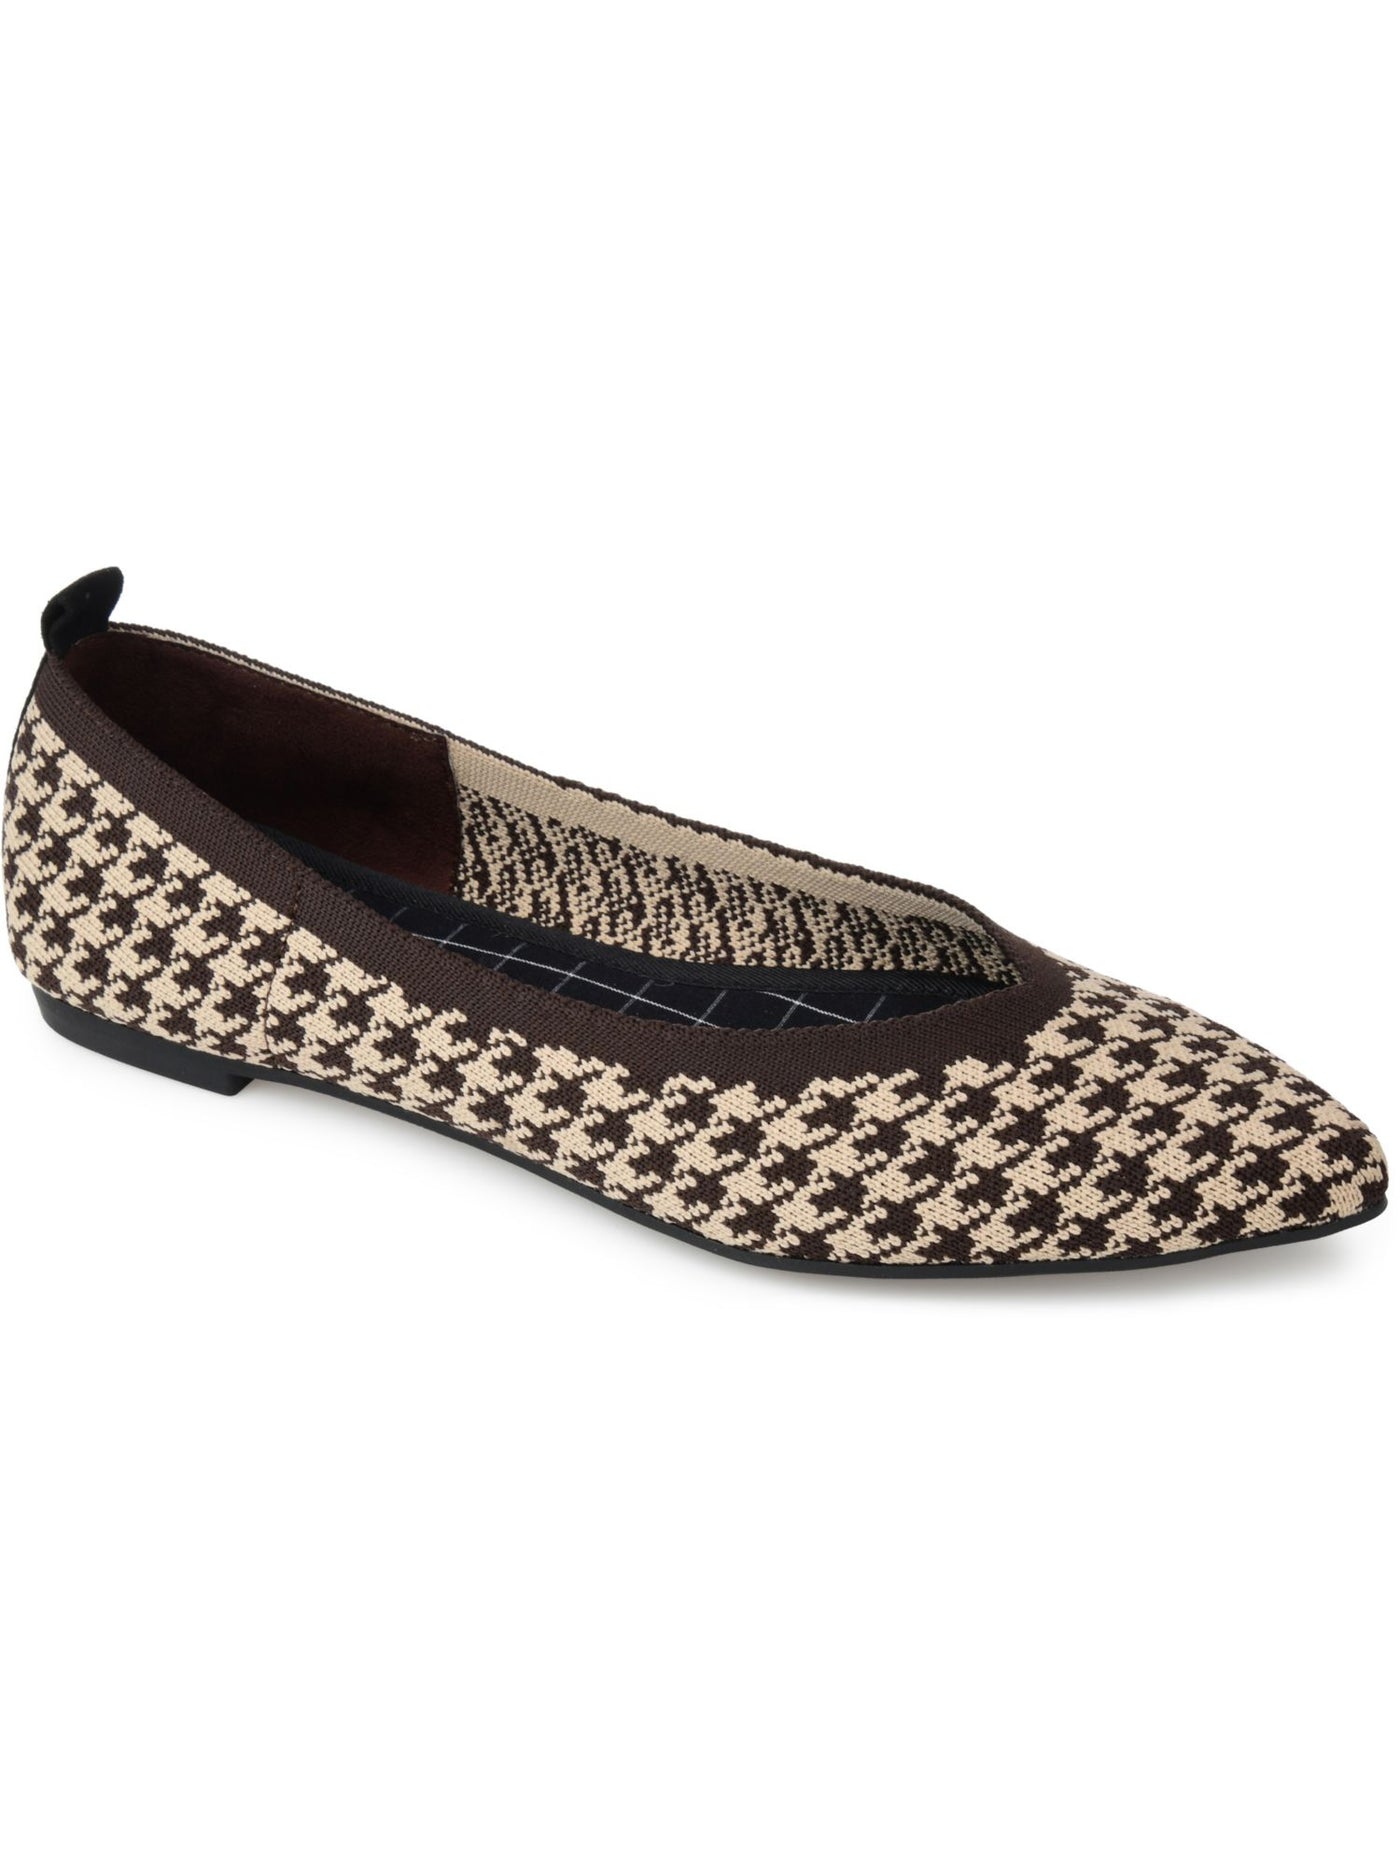 JOURNEE COLLECTION Womens Brown Dalmation Studded Padded Karise Pointed Toe Slip On Flats Shoes 9